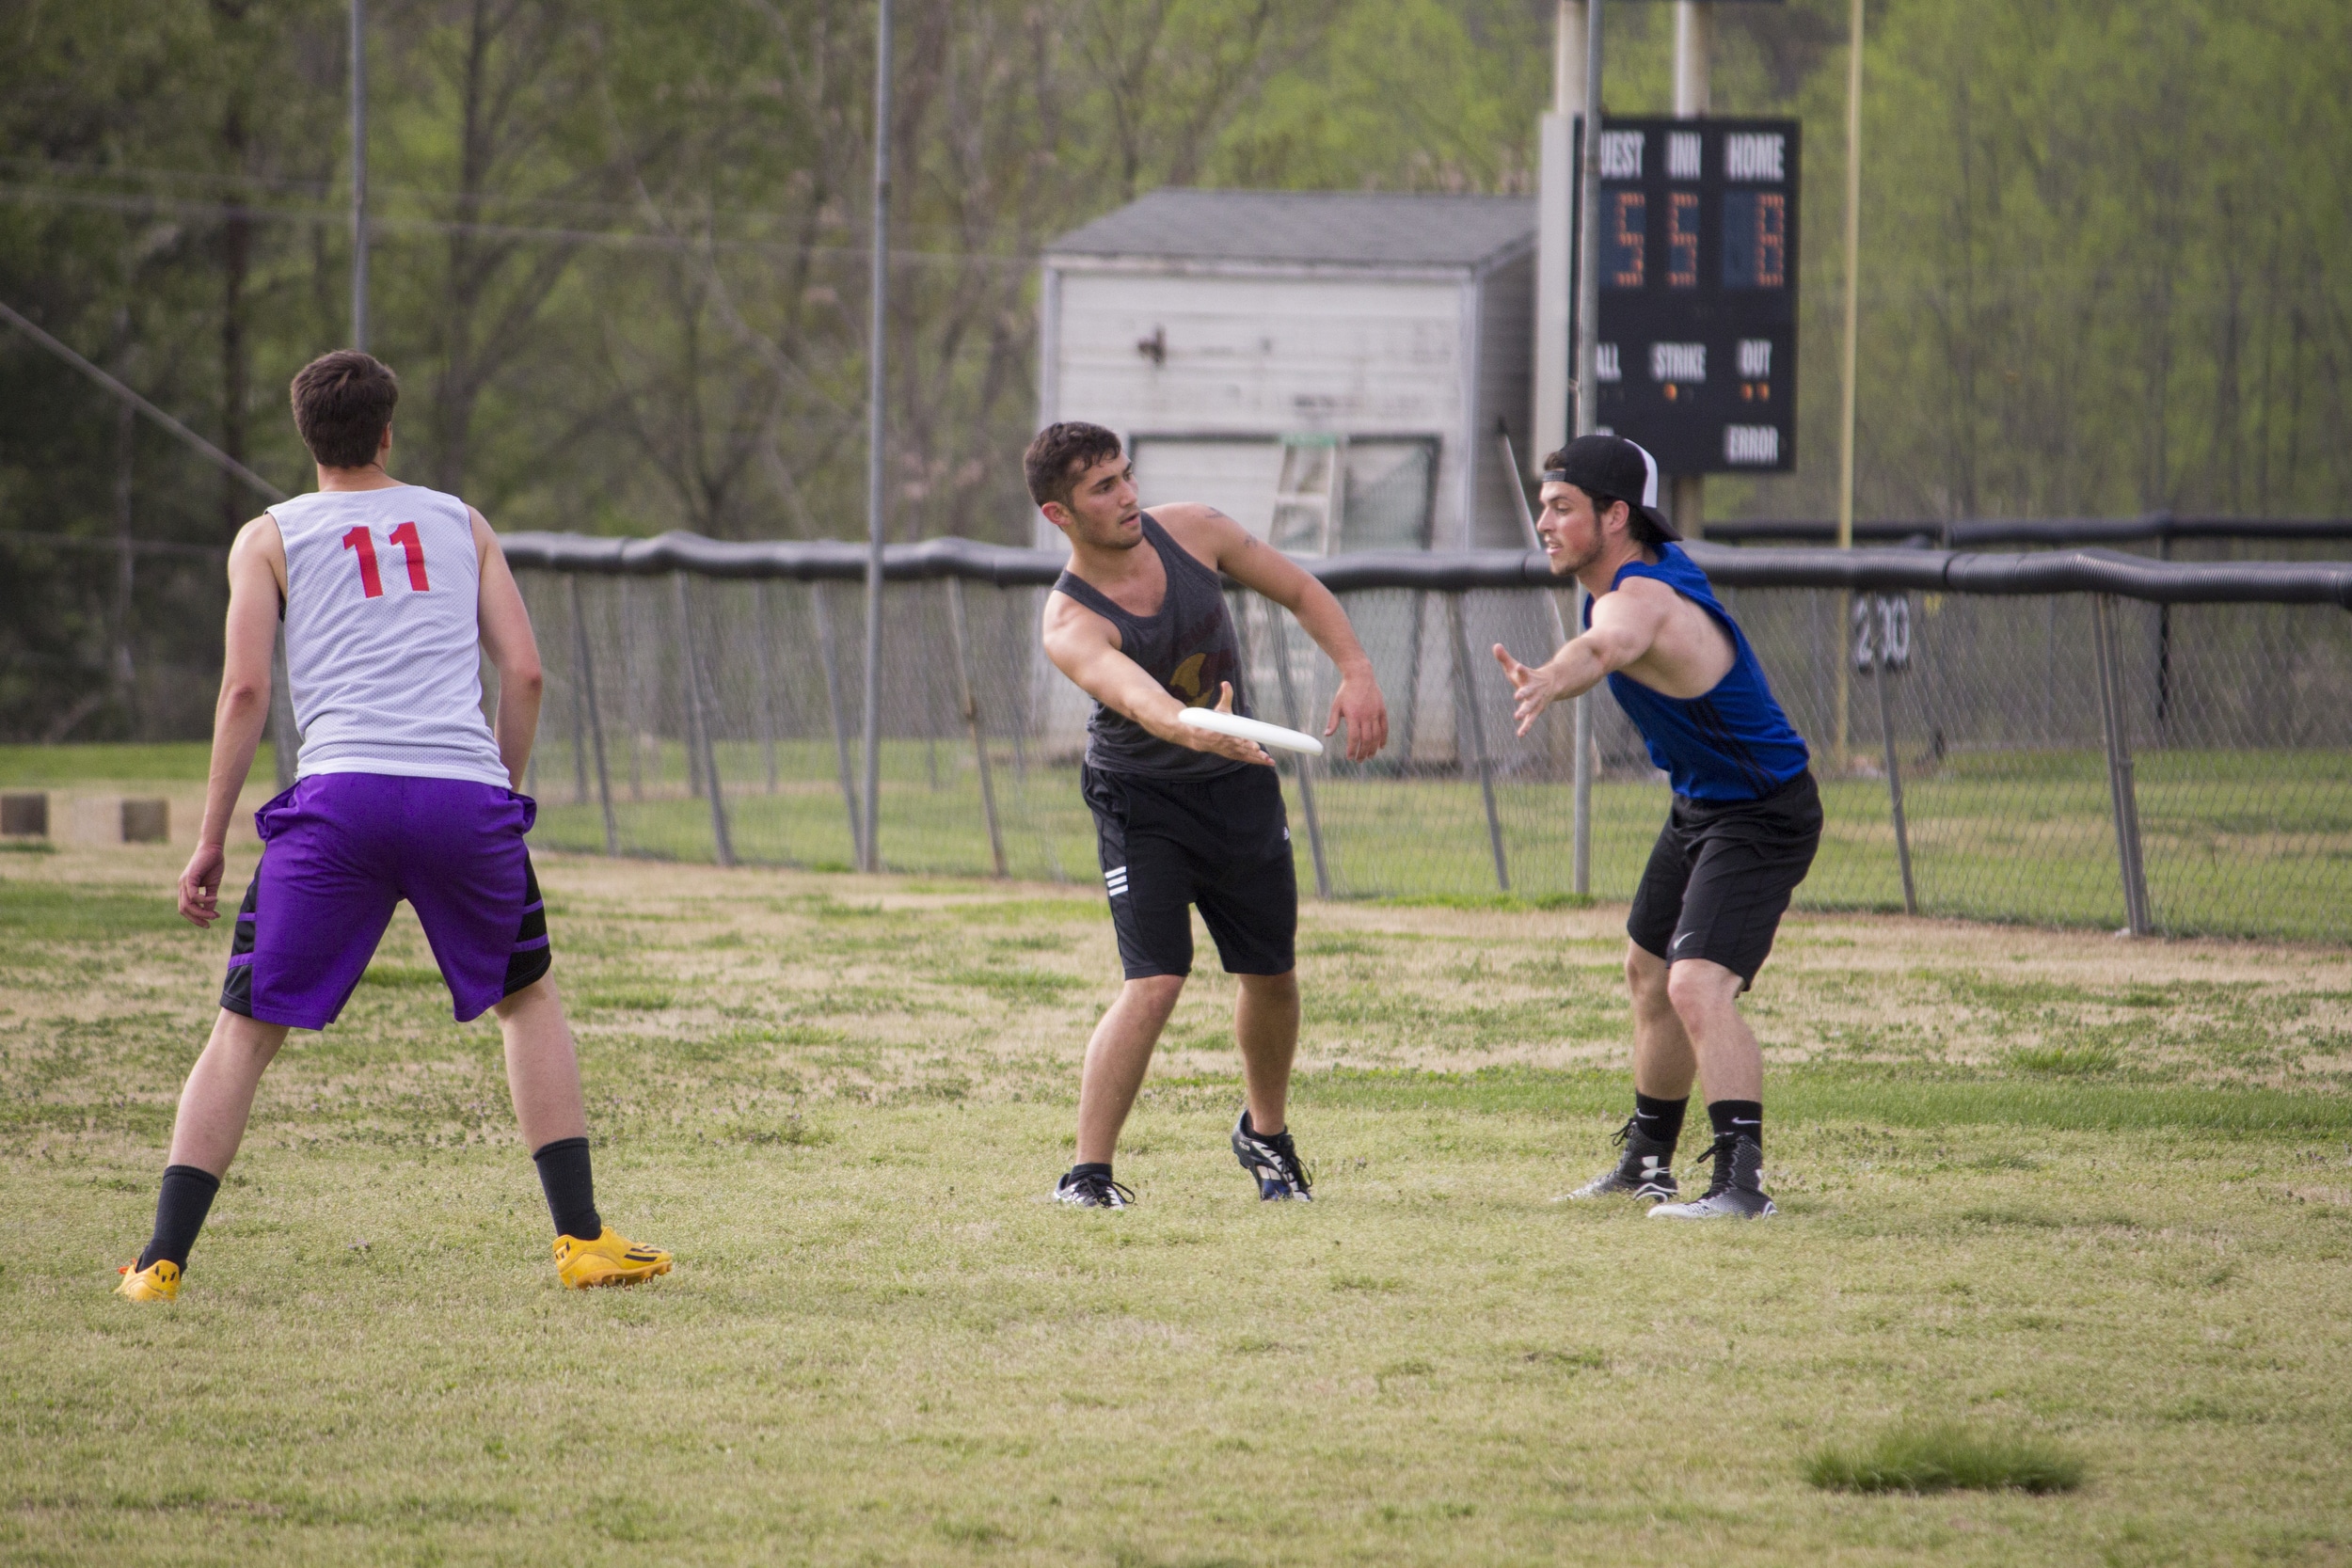  Josh Mckeown flicks the frisbee to the right side to score a point.&nbsp; 